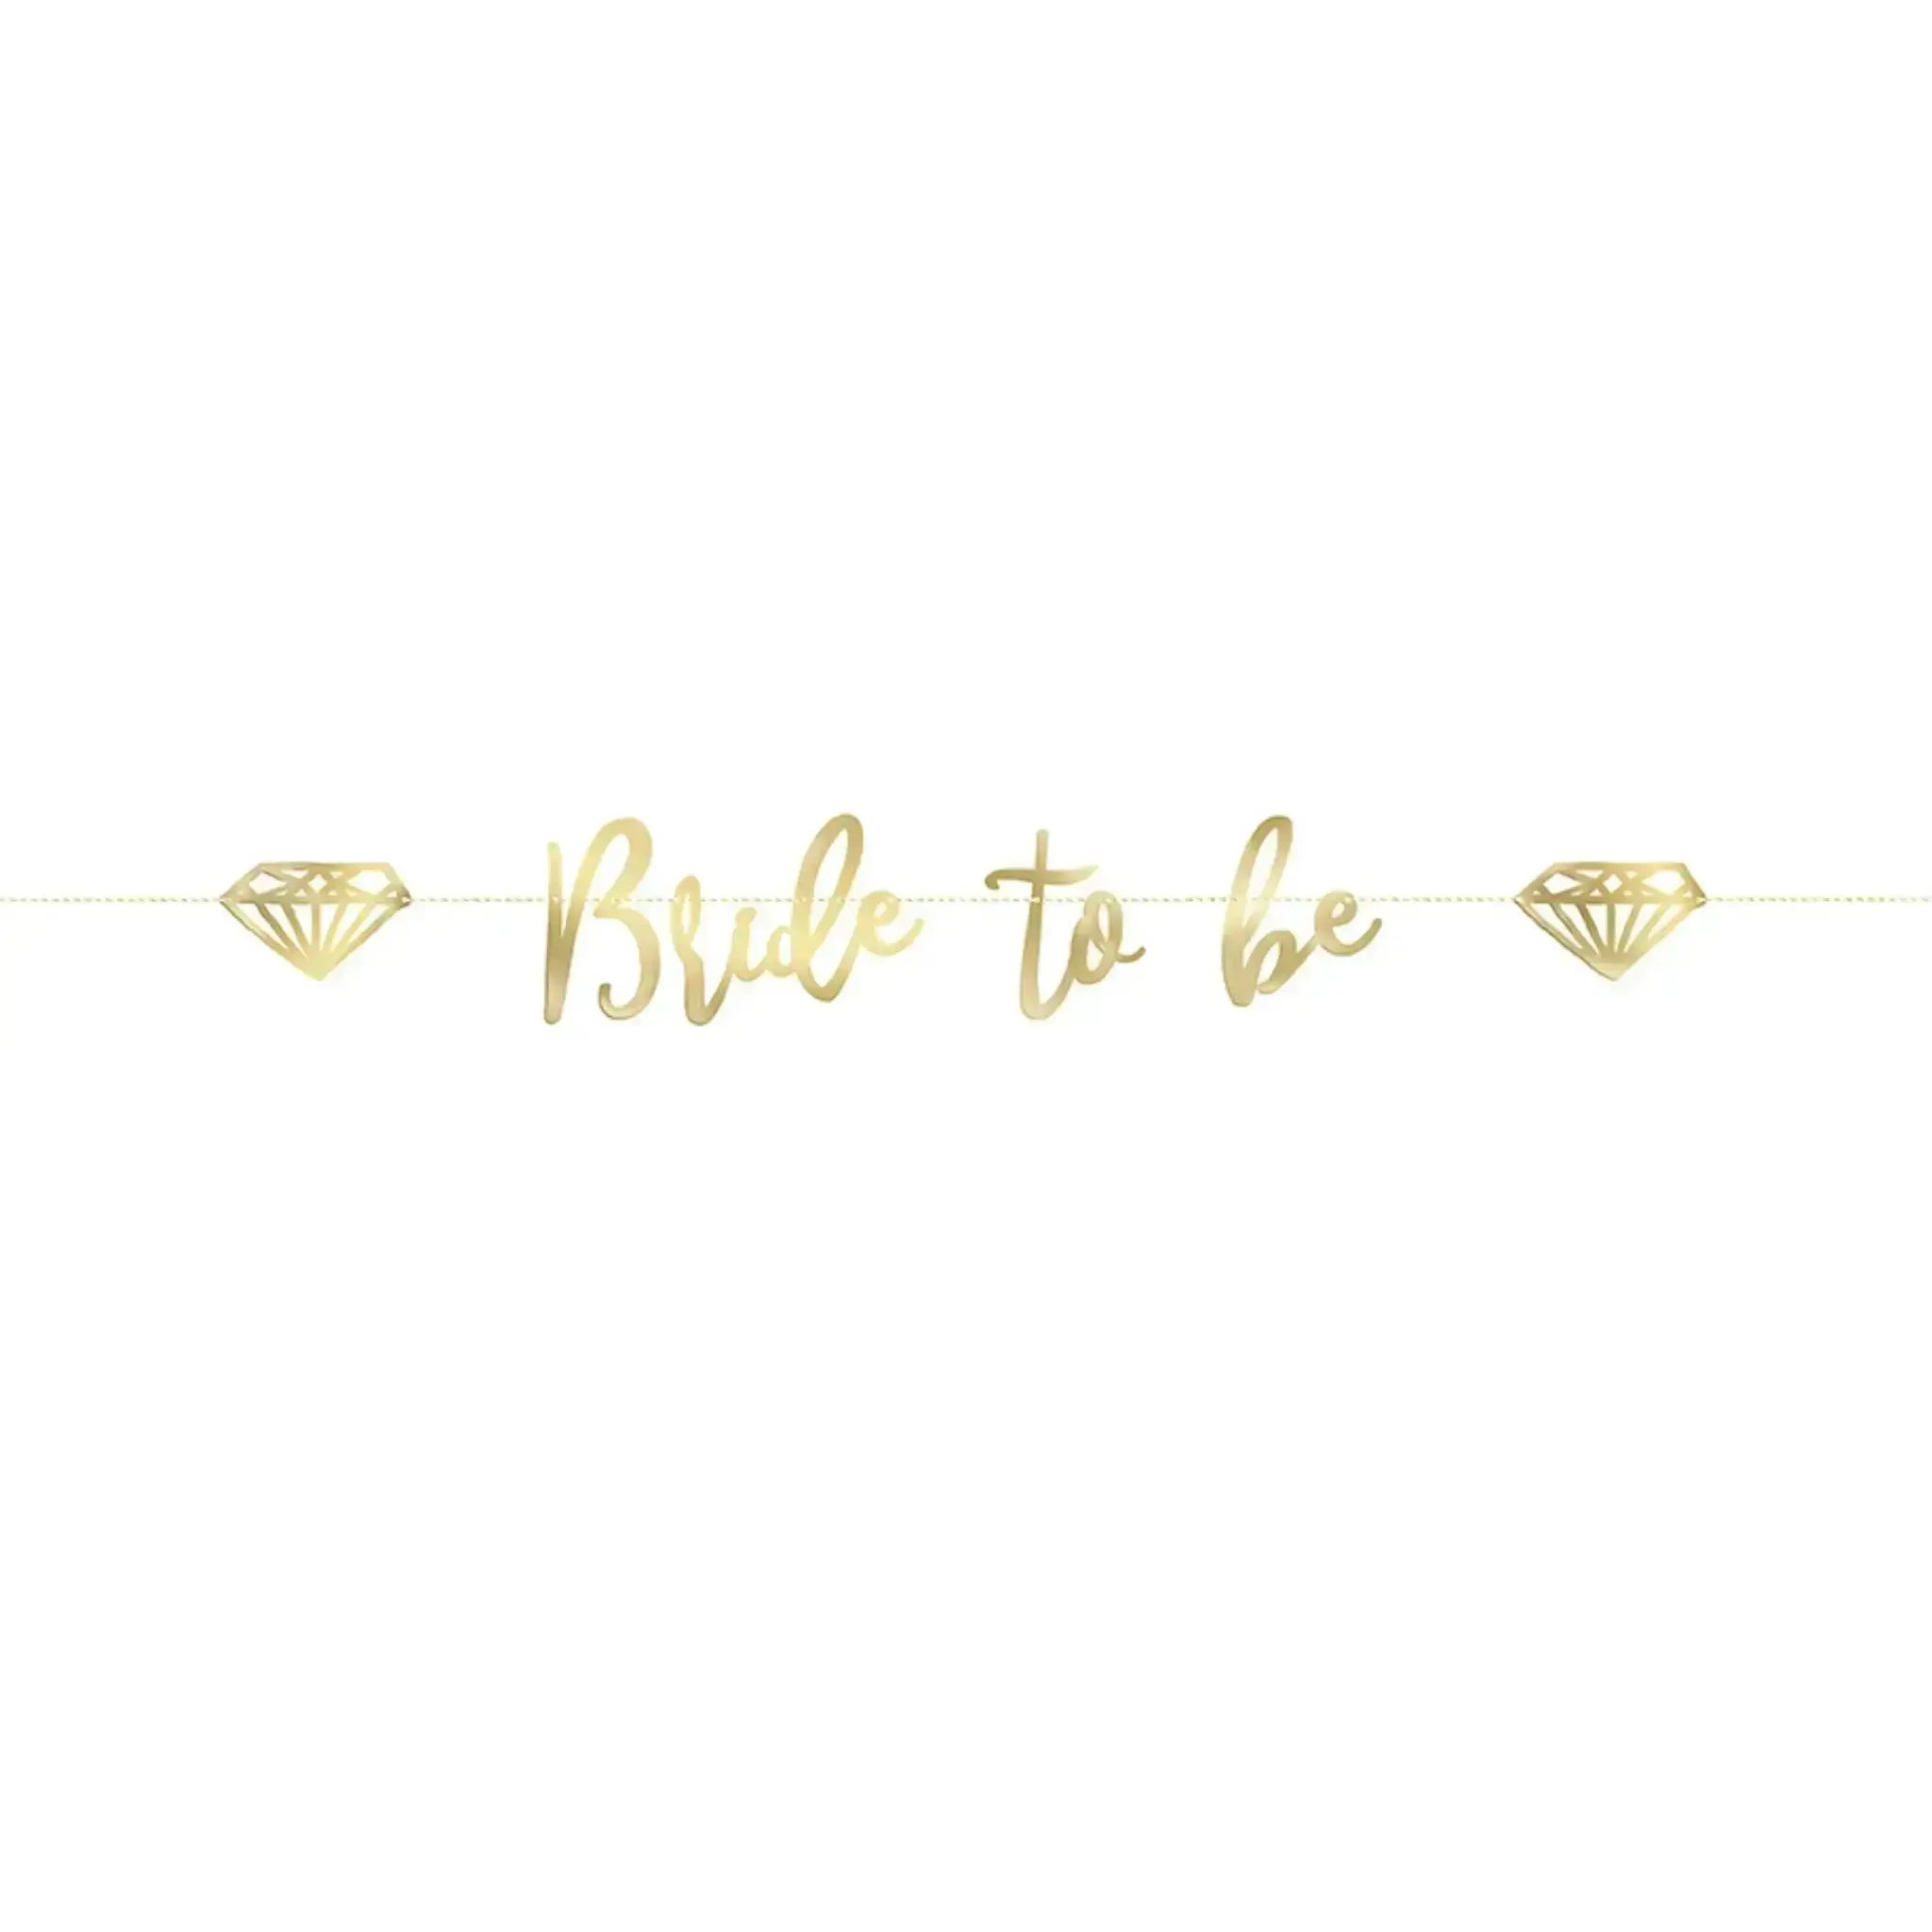 Bride To Be - Letter Banner | The Party Hut